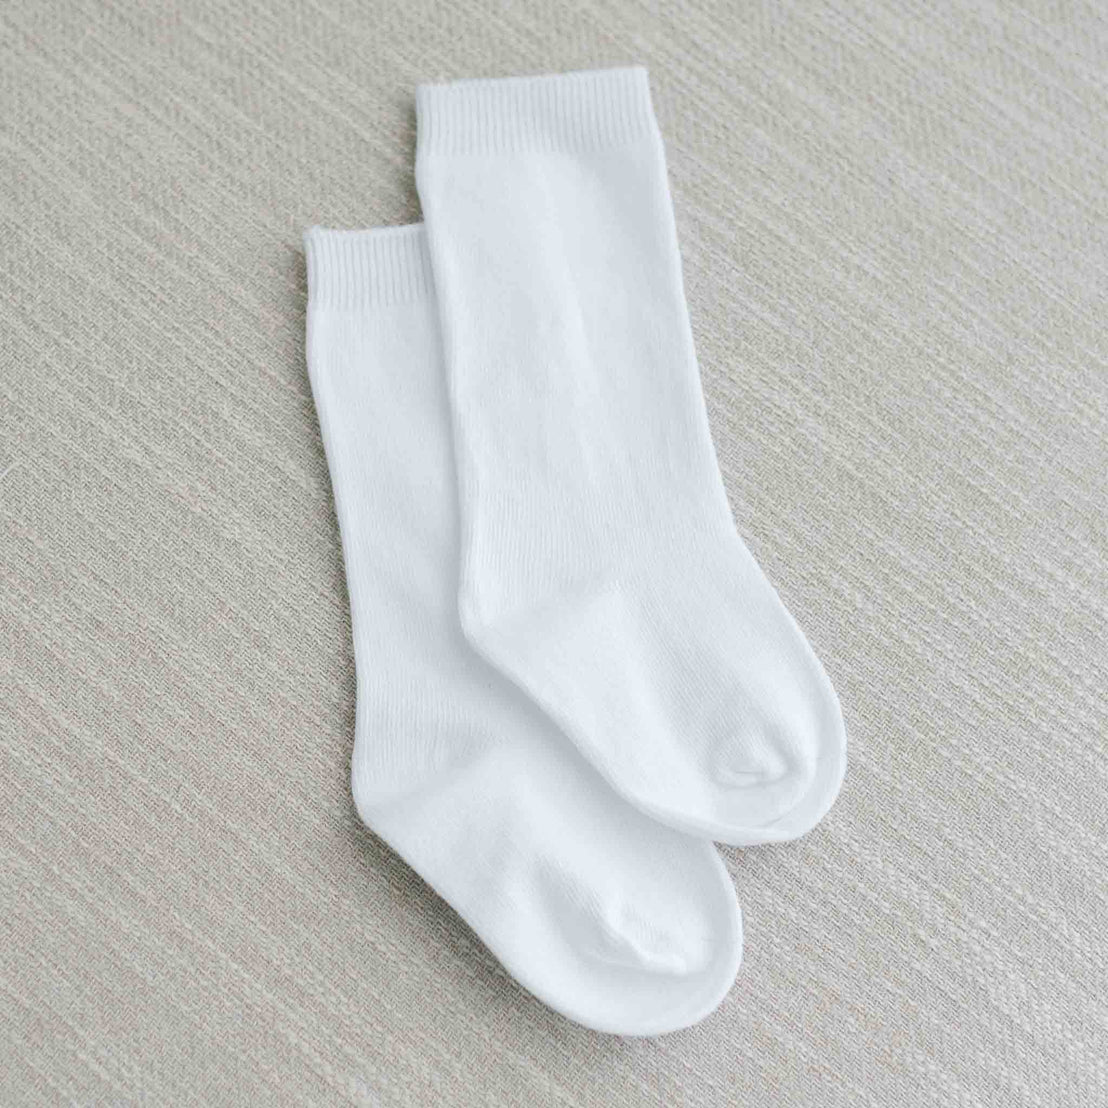 Flat lay photo of the Boys White Knee Socks made from cotton/nylon and spandex.